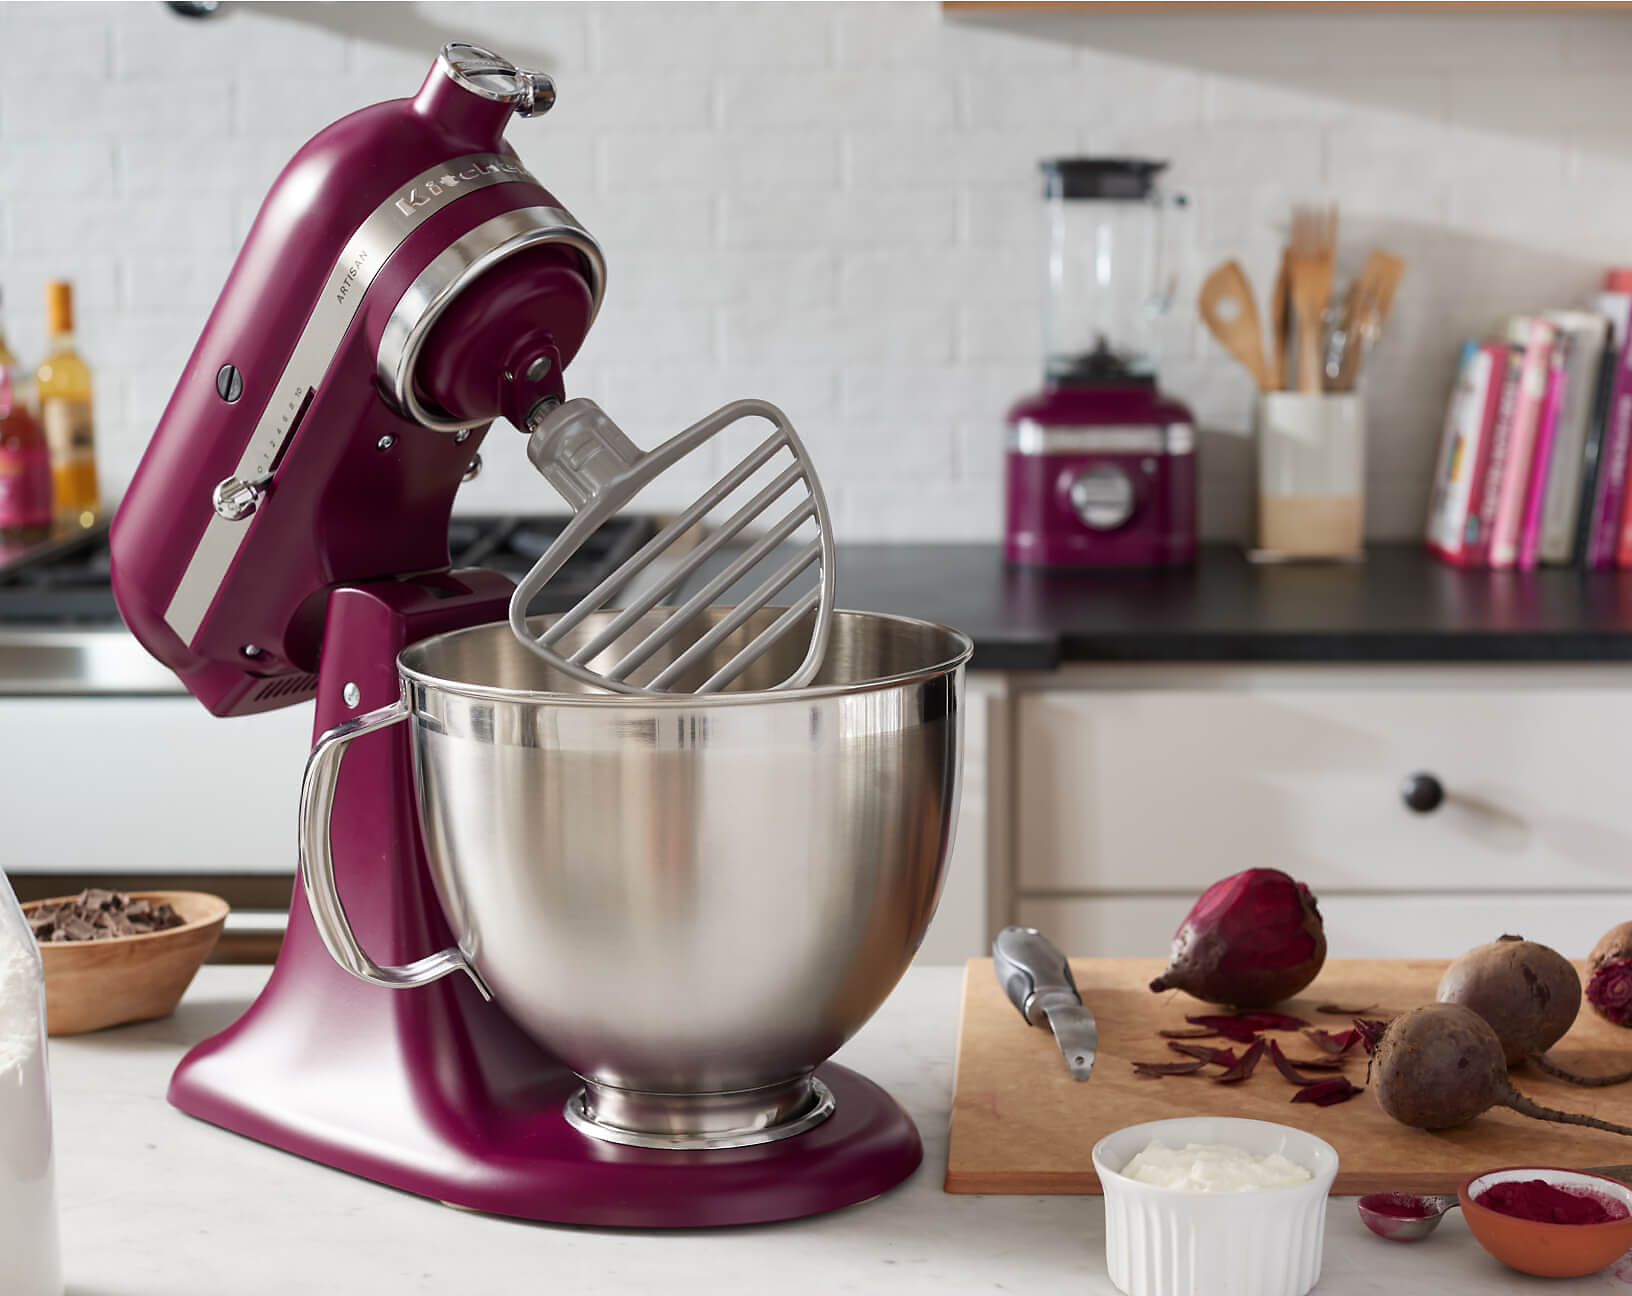 An Artisan® Series Stand Mixer and a K400 Variable Speed Blender in Beetroot.